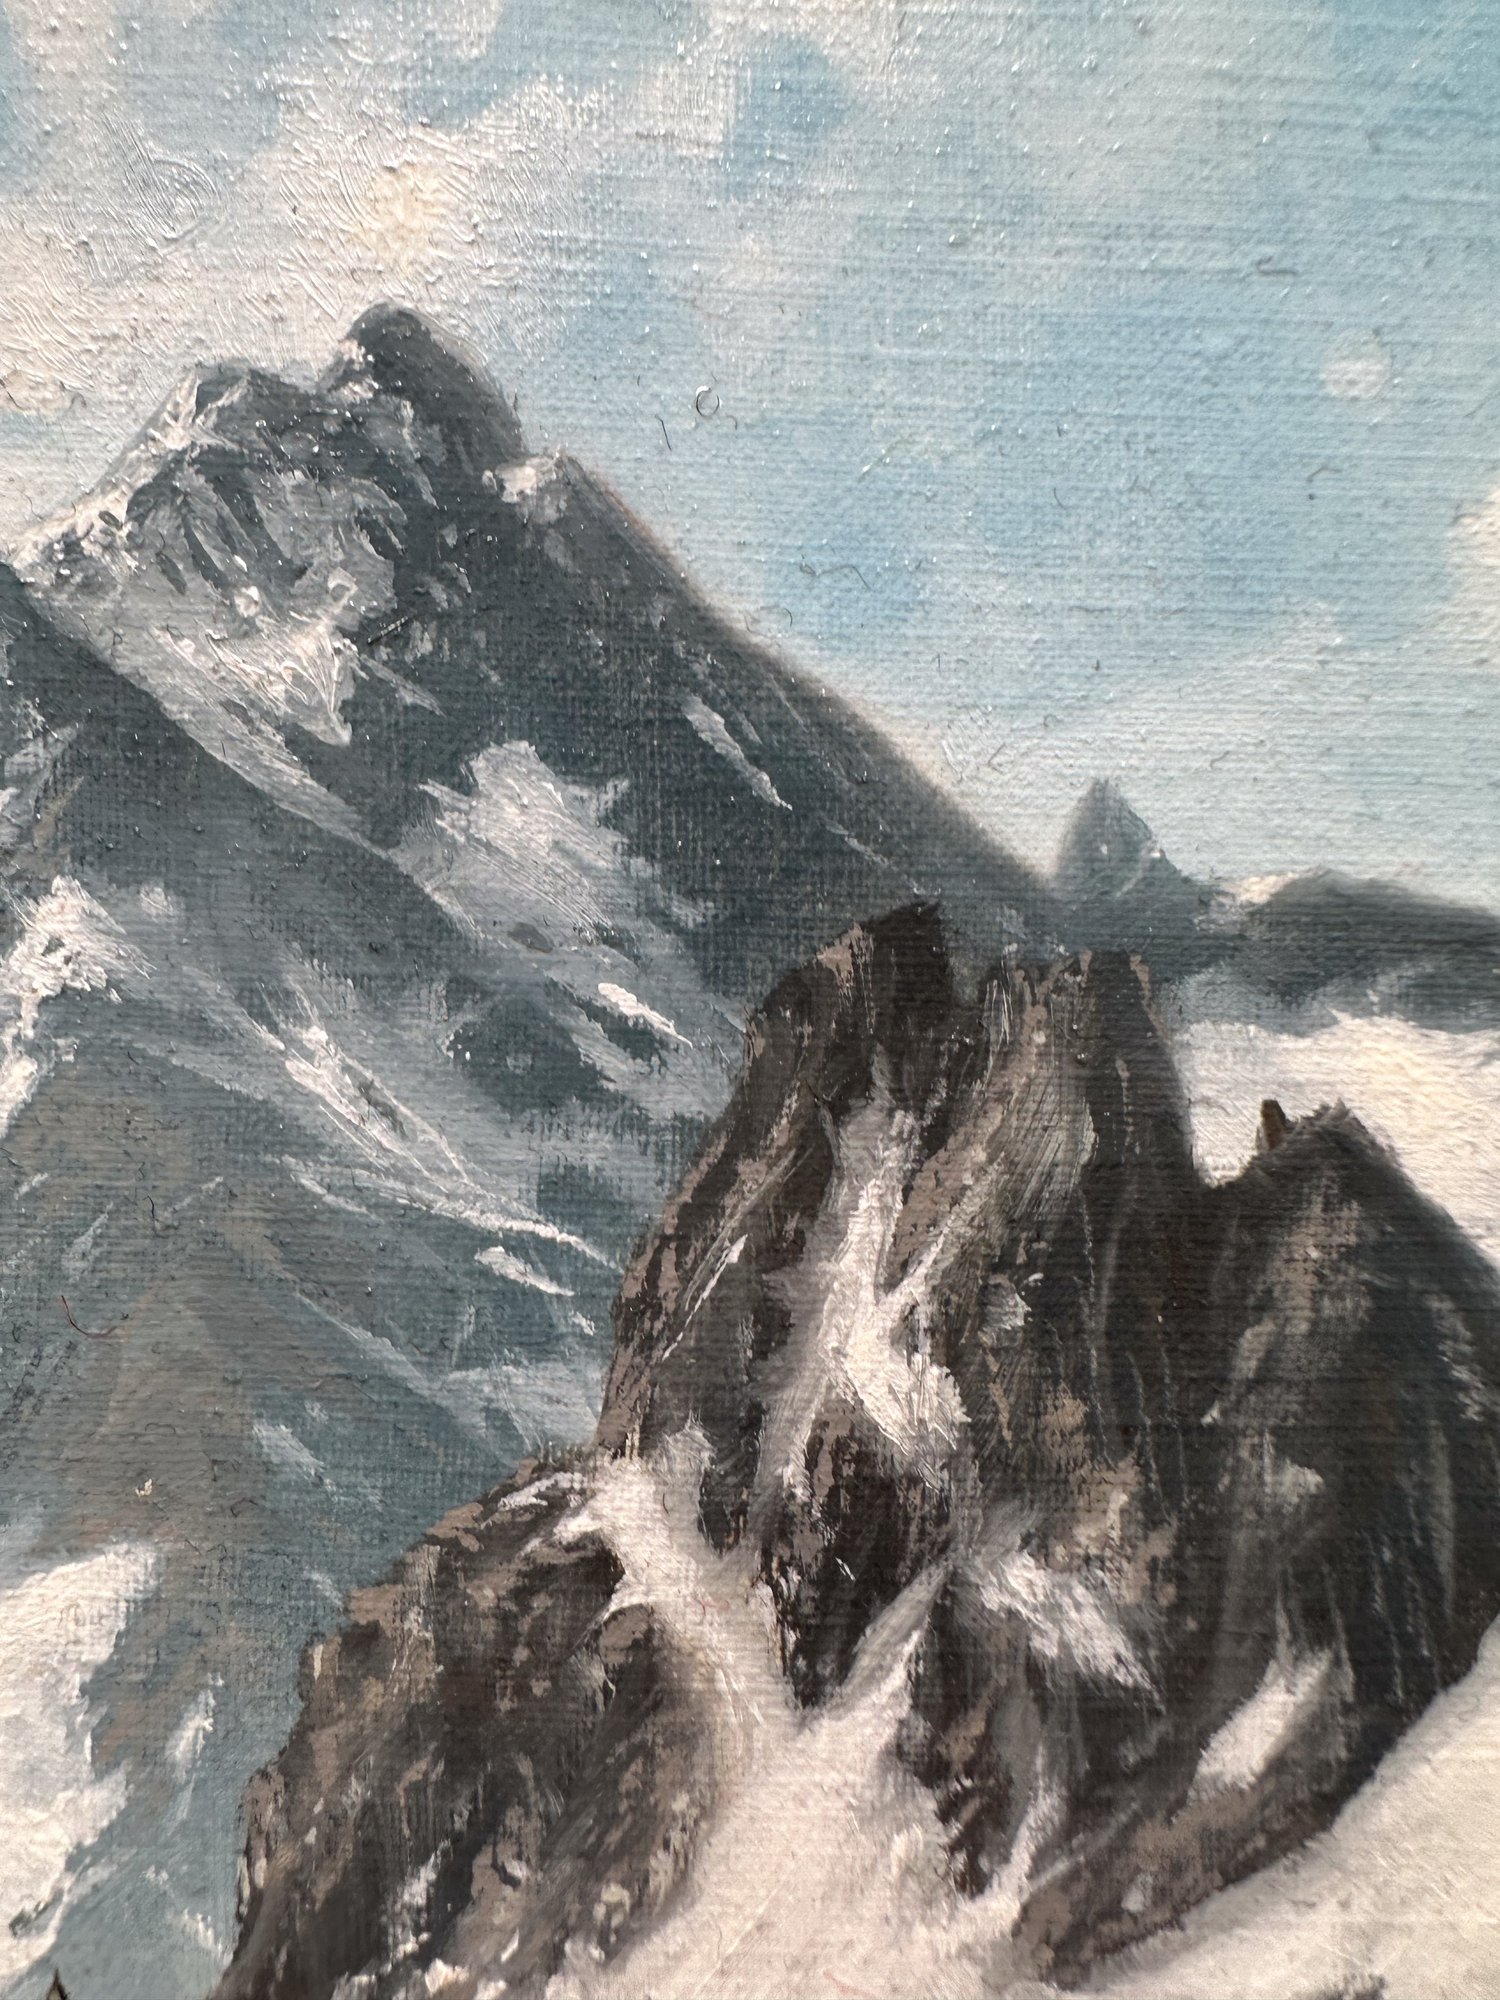 Image of 'Mountain Study' by RONCH